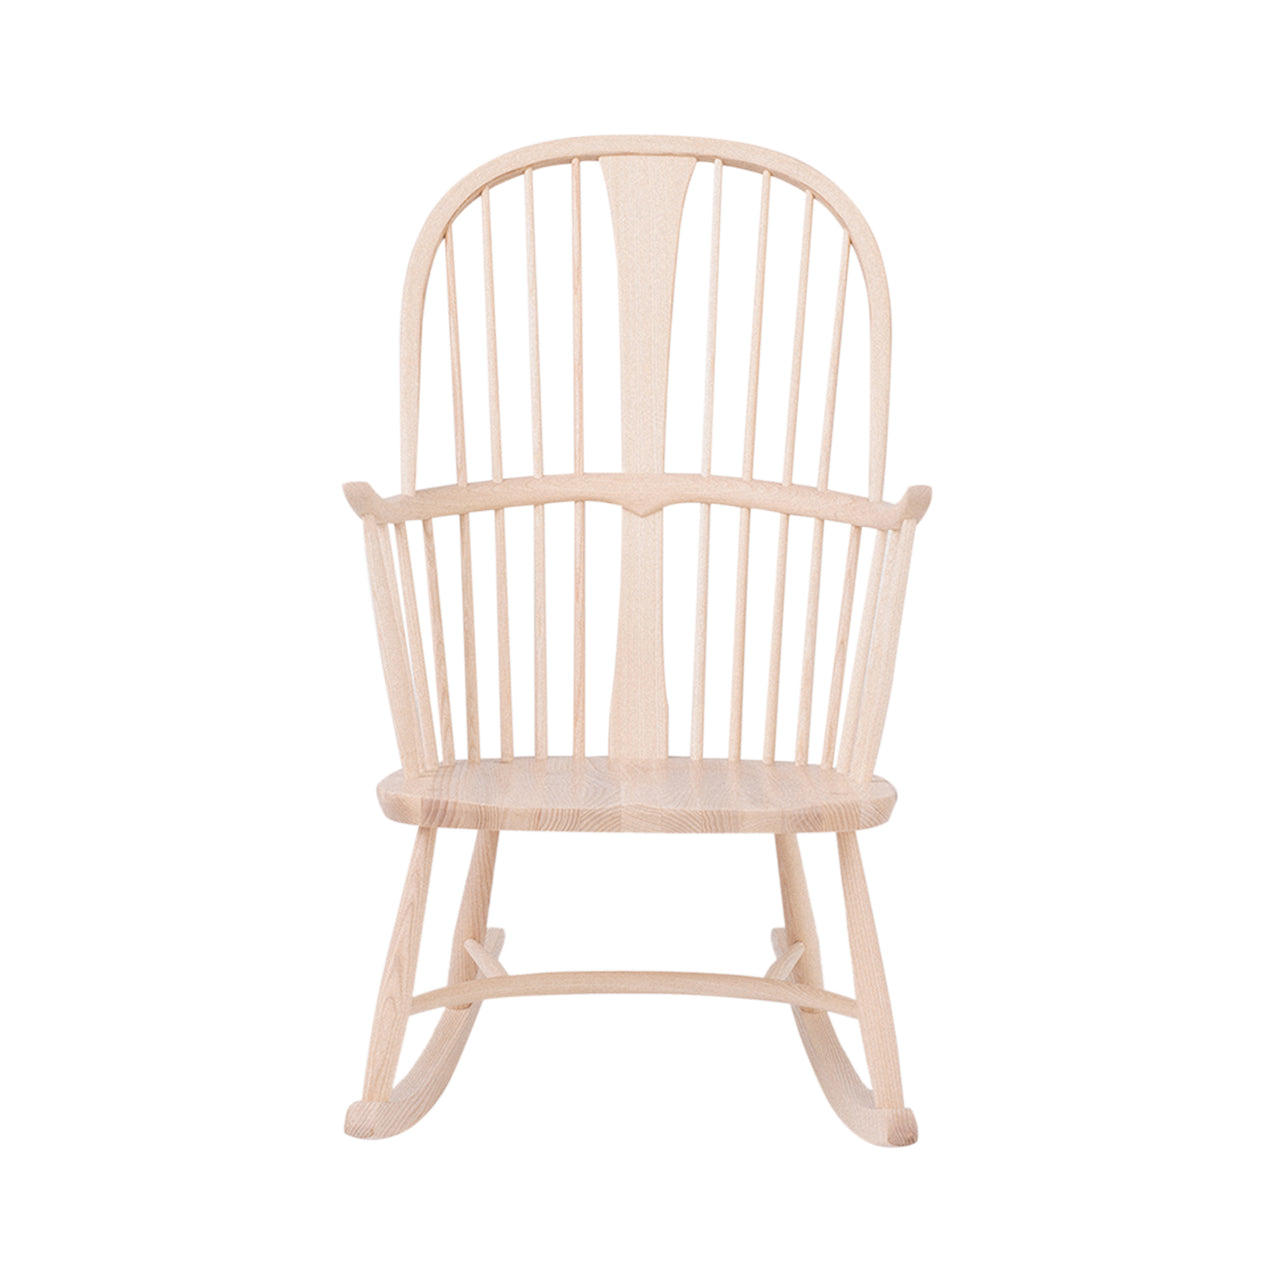 Originals Chairmakers Rocking Chair: Natural Ash